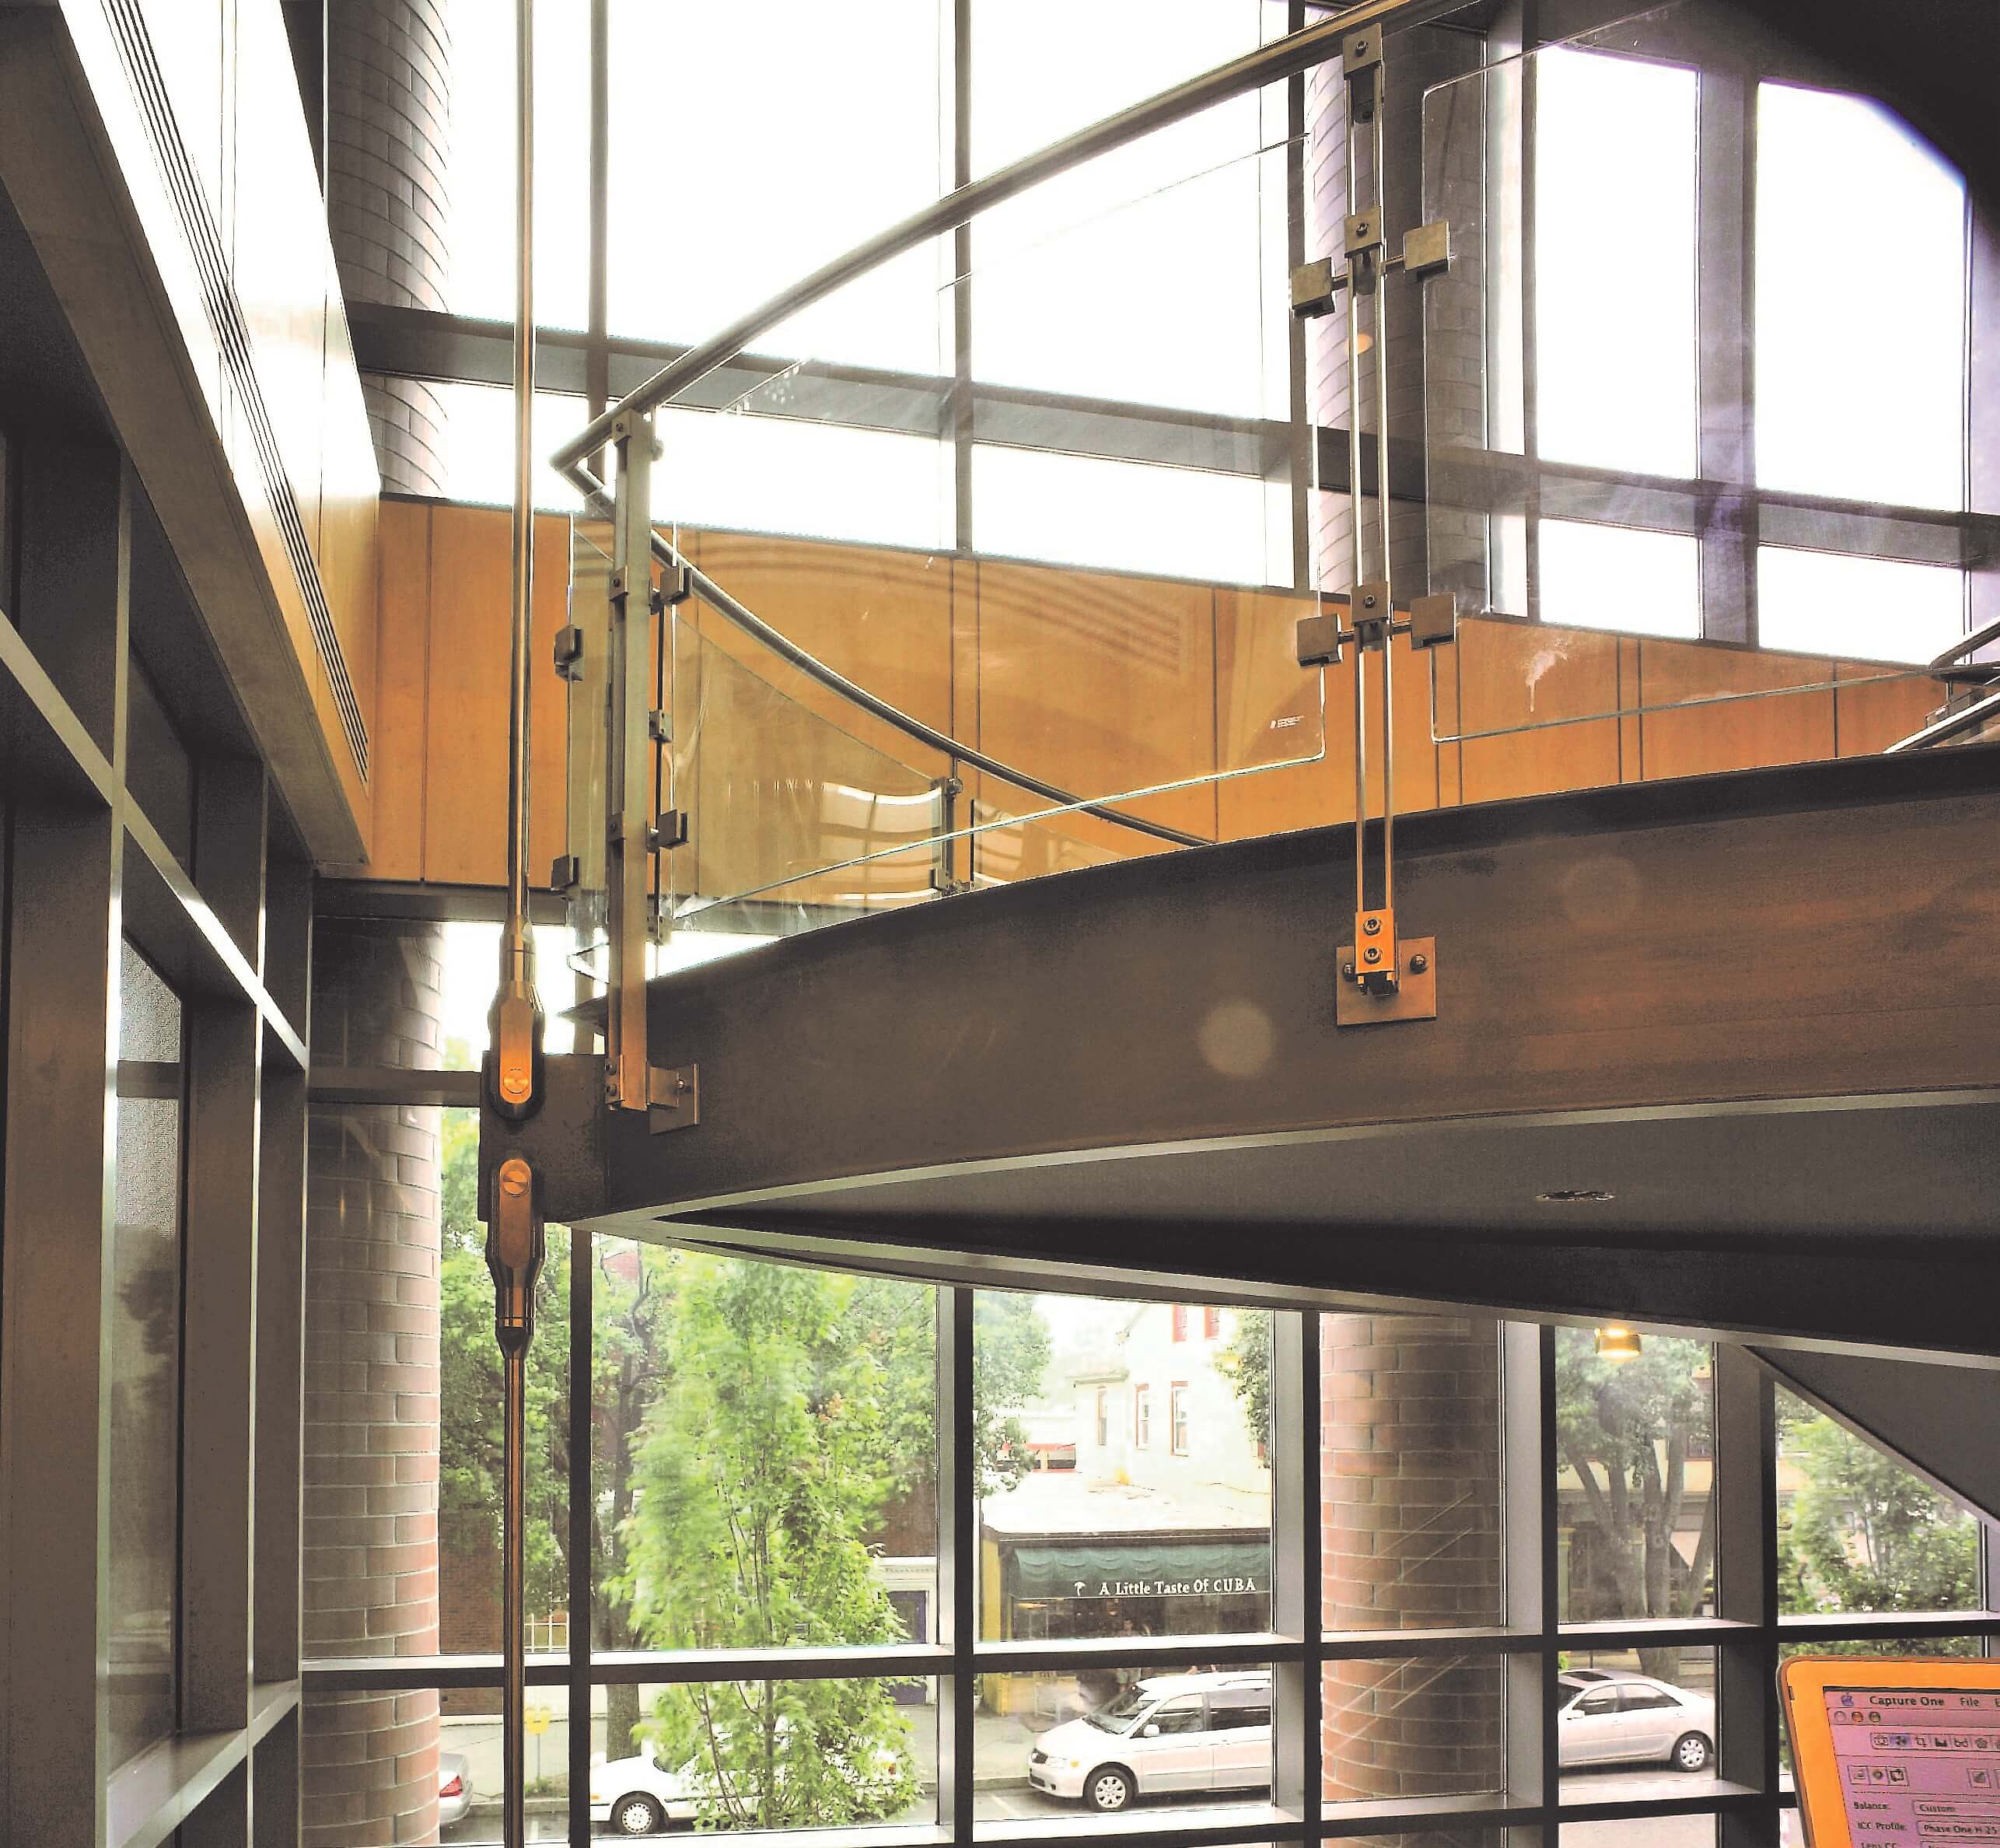 Inox curved handrail with glass infill installation at Princeton Public library, NJ.